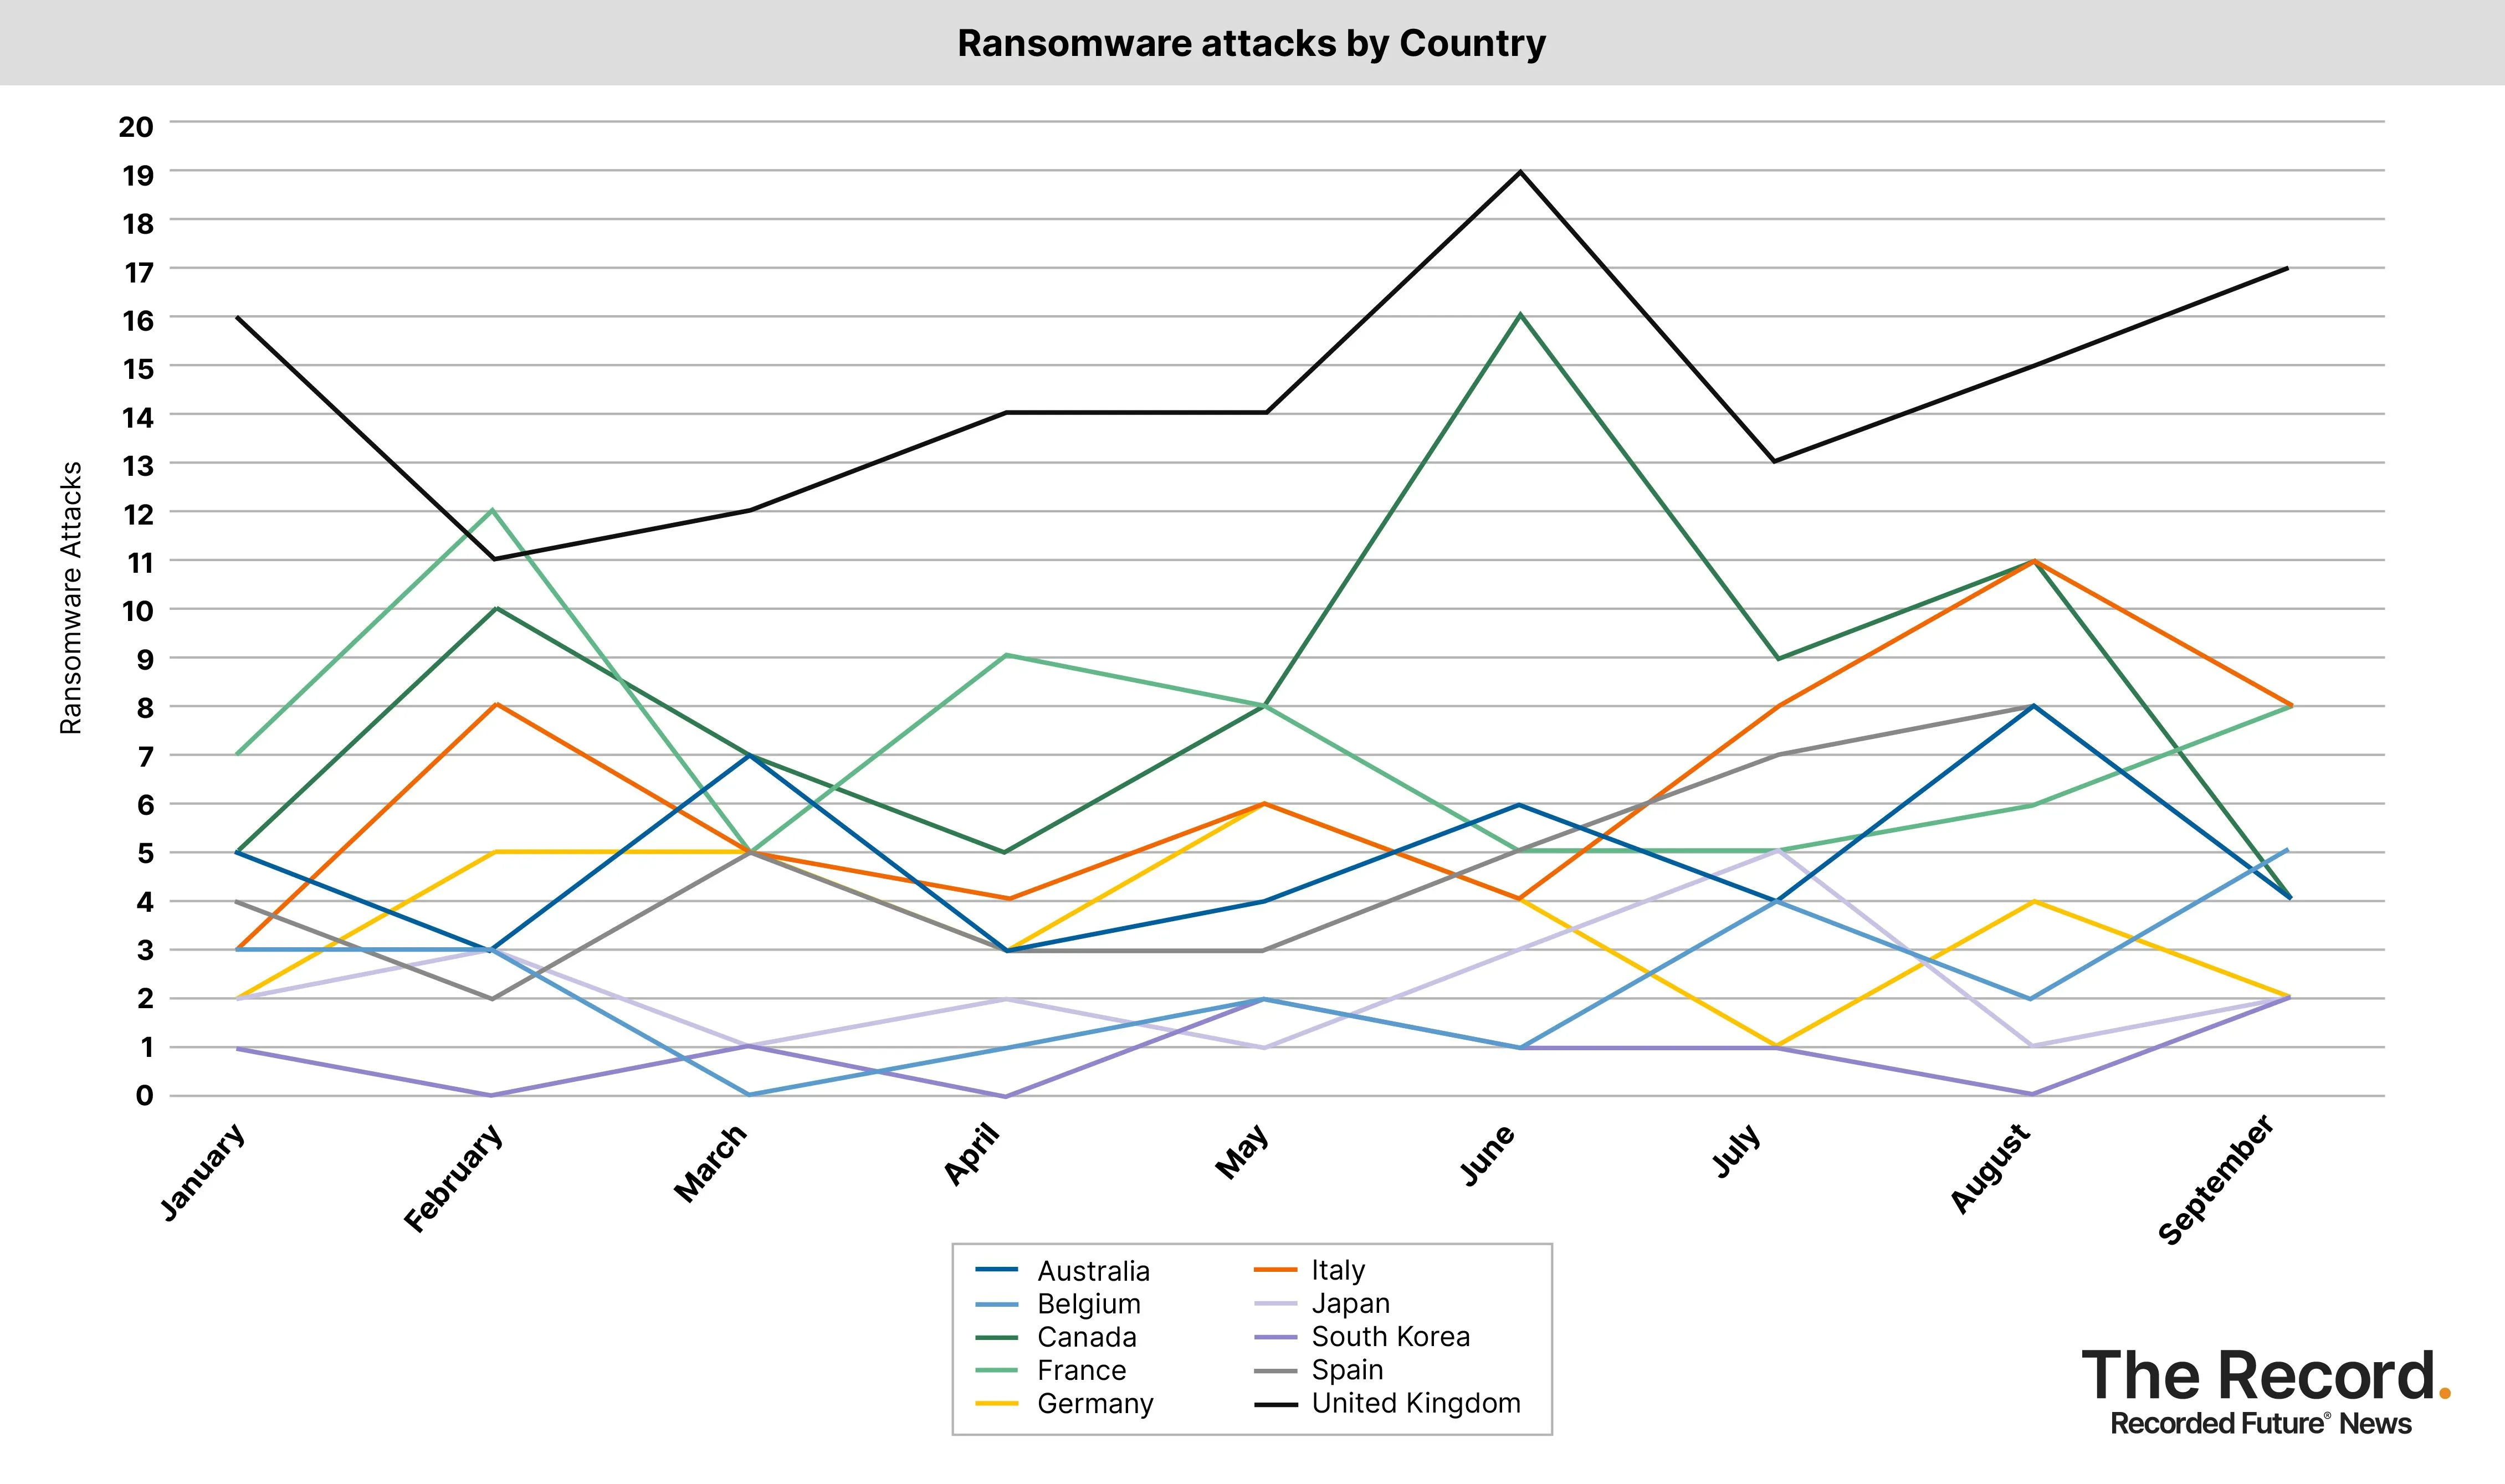 2023_1016 - Ransomware attacks by country (10 countries) (1).jpg